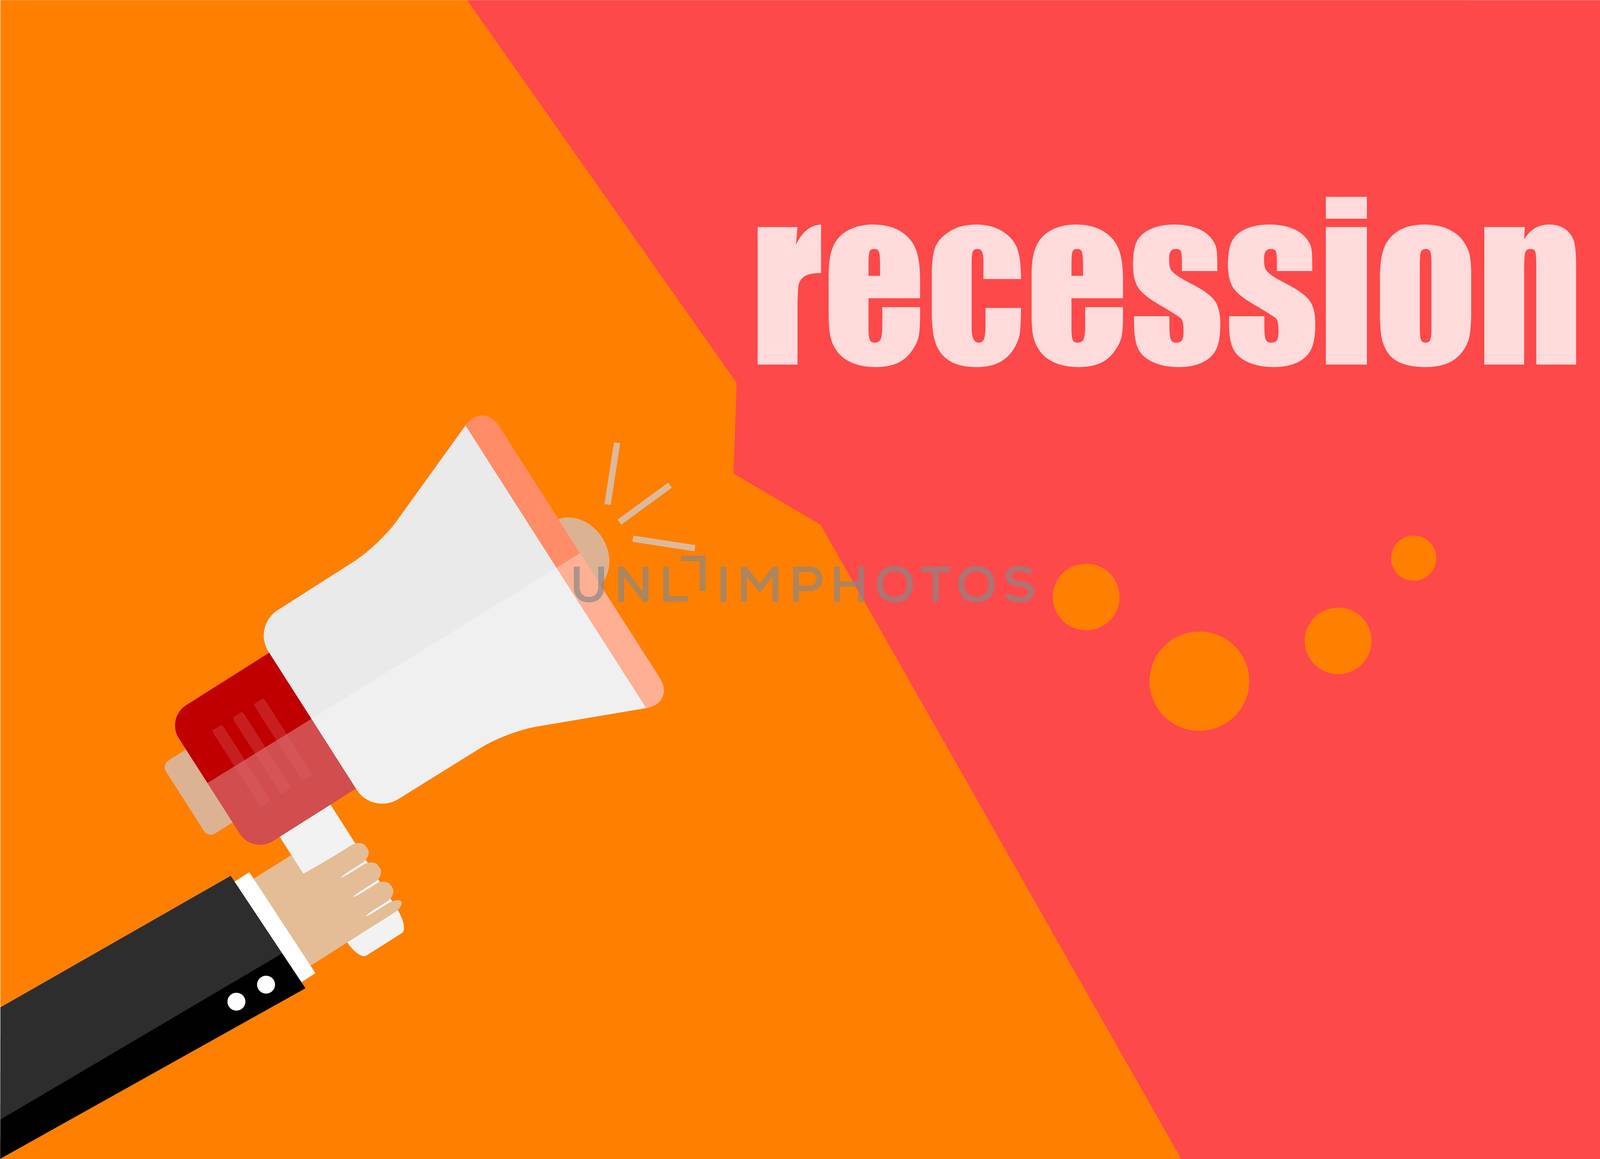 recession. Flat design business concept Digital marketing business man holding megaphone for website and promotion banners by fotoscool